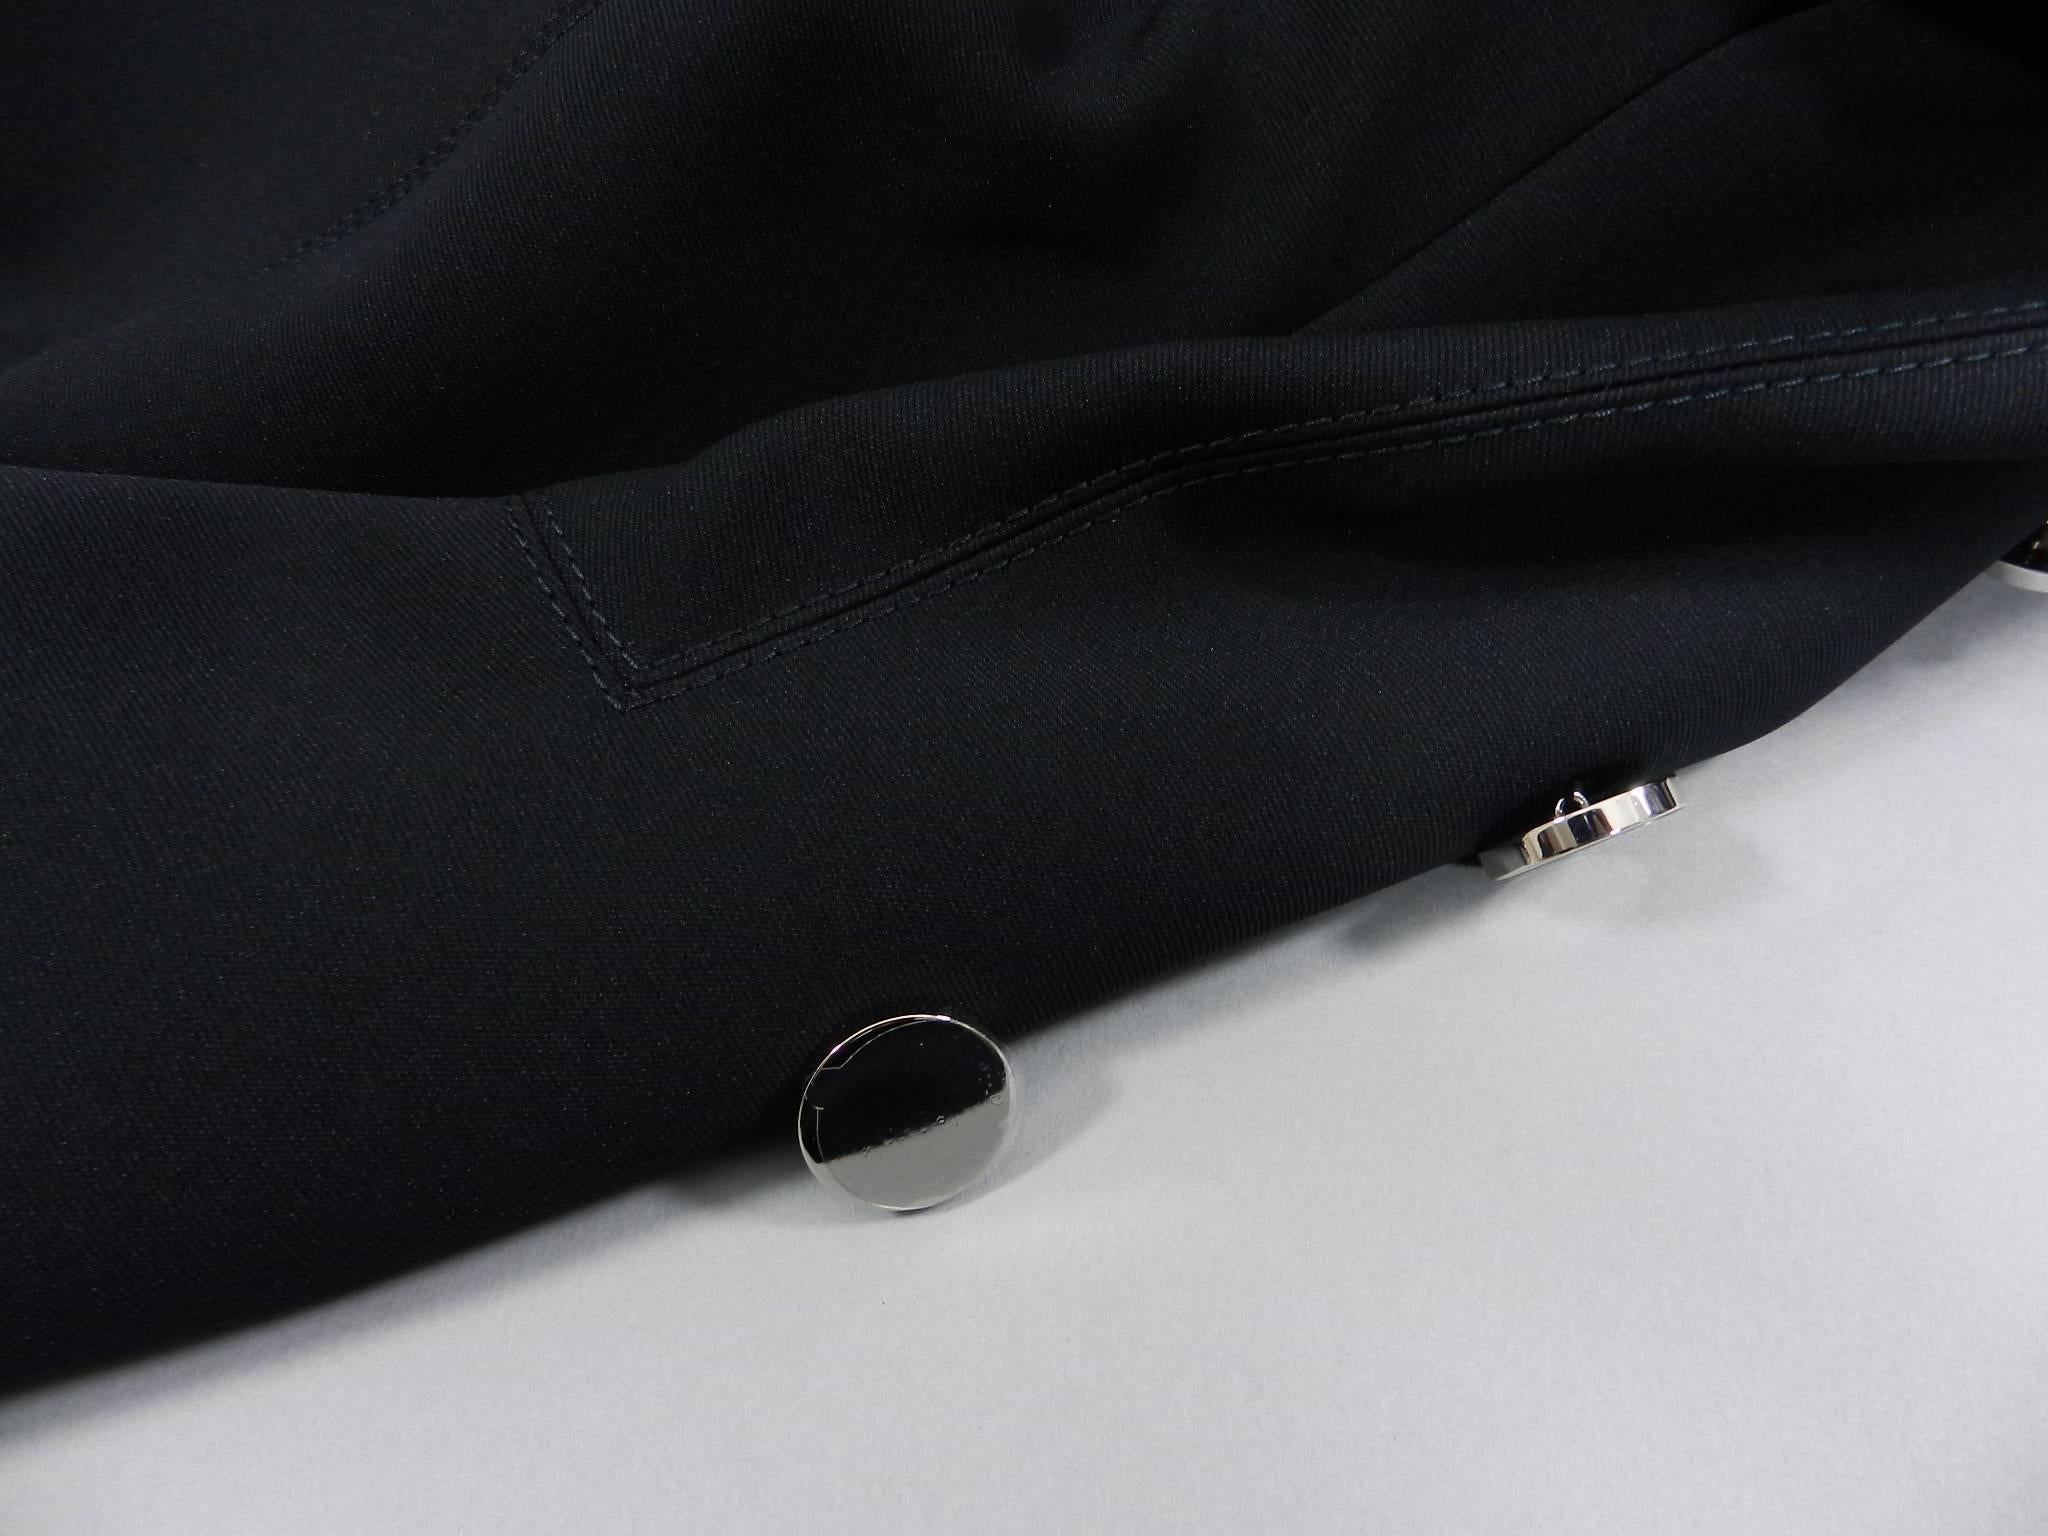 Gucci pre-fall 2014 Black Dress coat with Silver Buttons 3